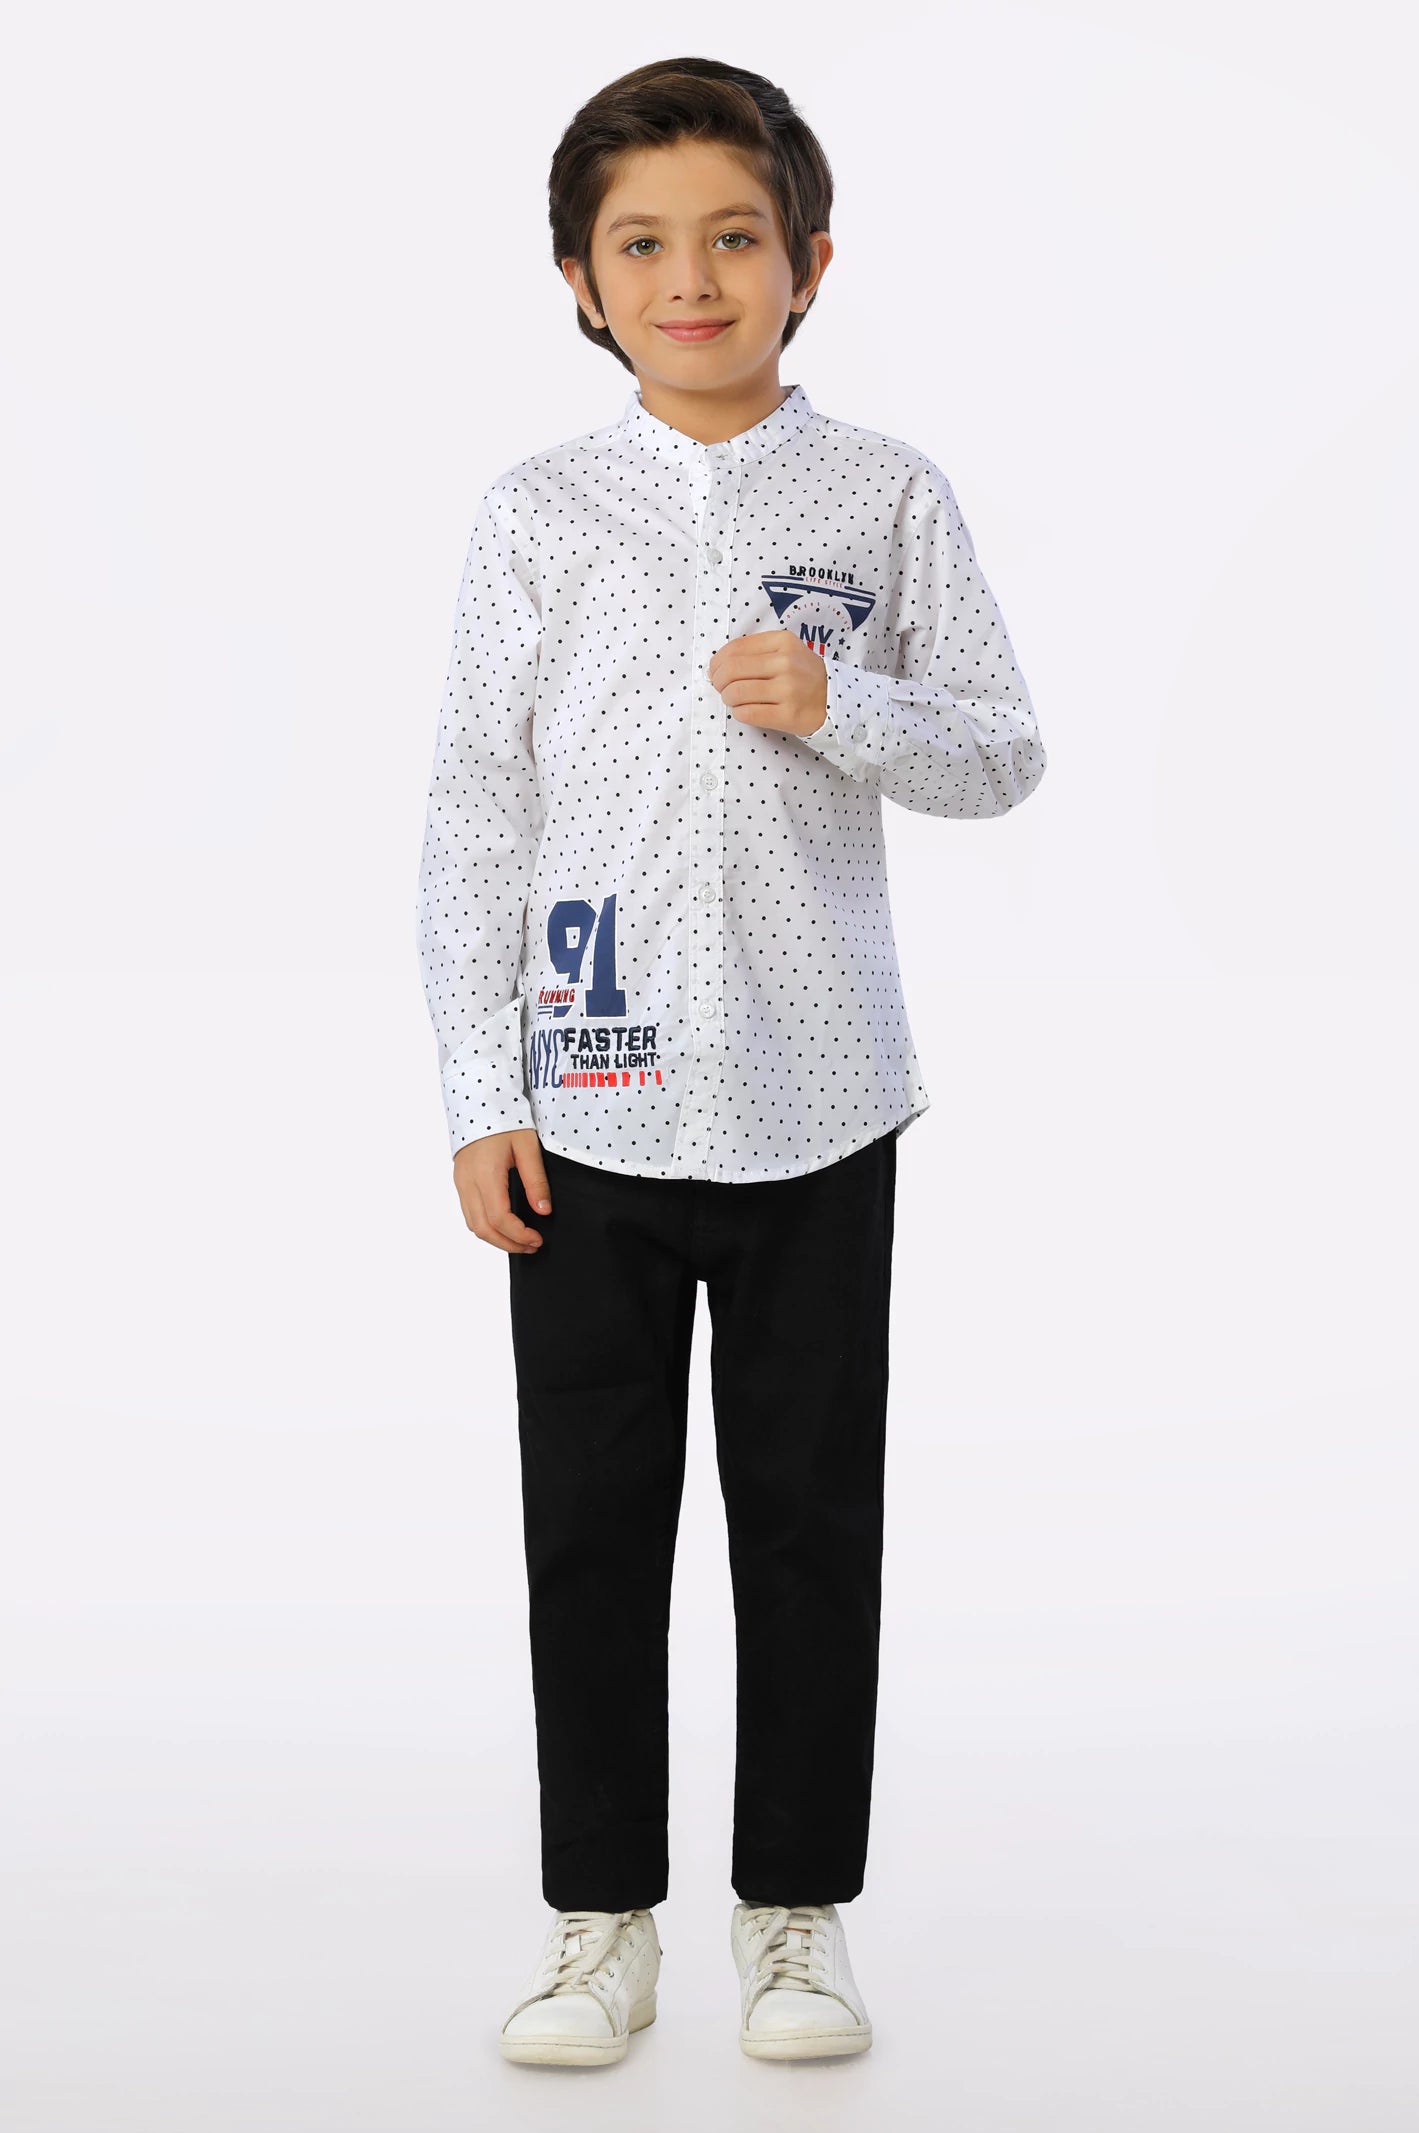 White Polka Dots Printed Boys Shirt From Diners